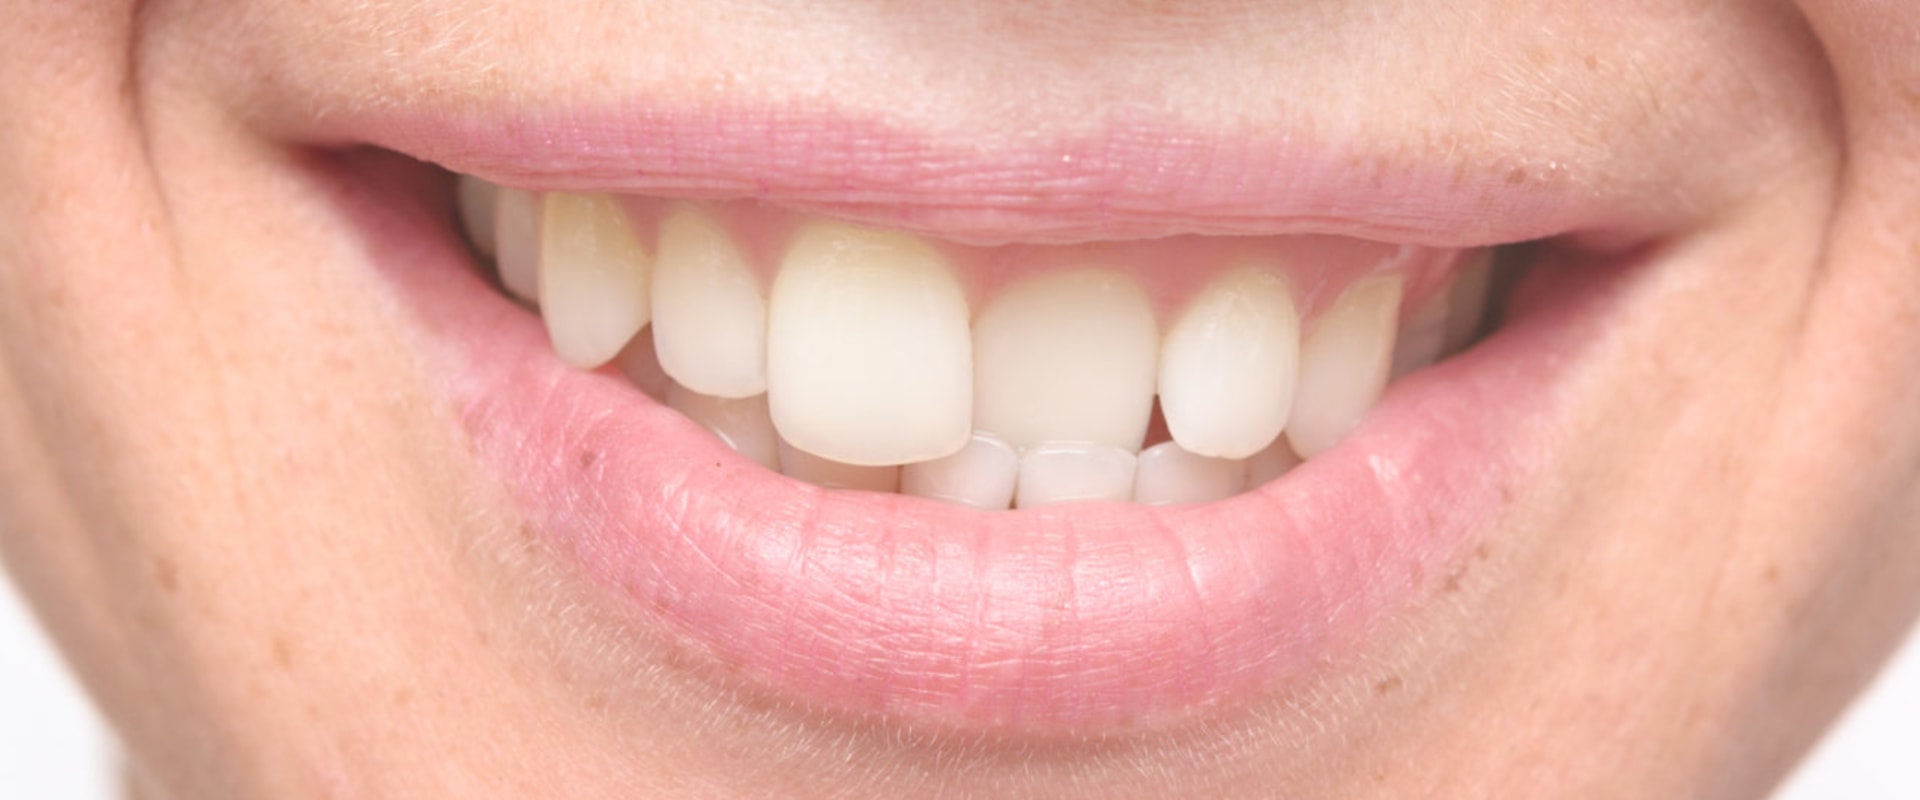 Non-Orthodontic Treatments for Crooked Teeth